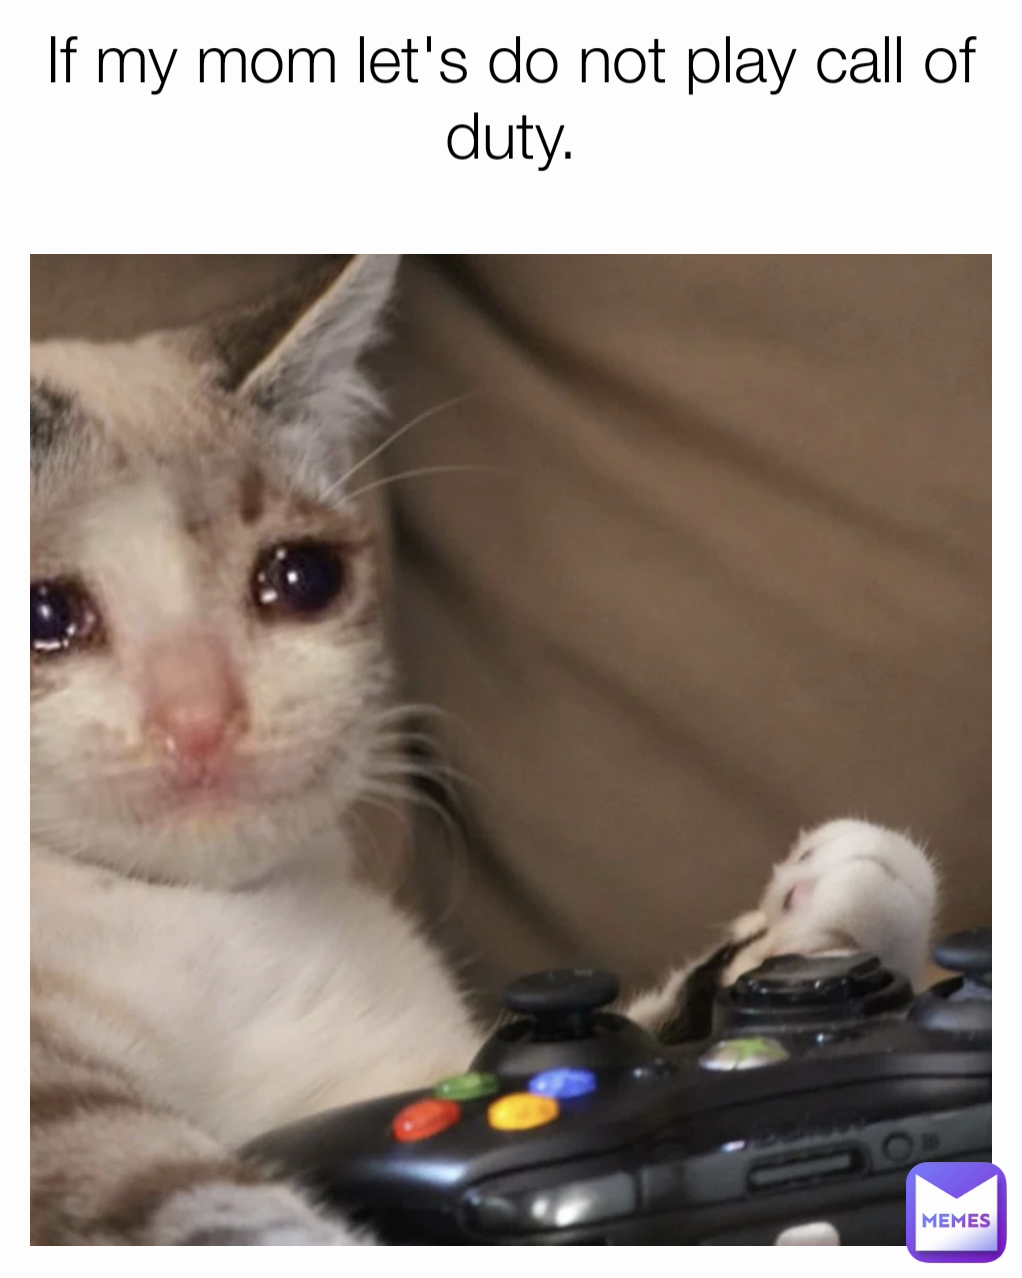 If my mom let's do not play call of duty.
